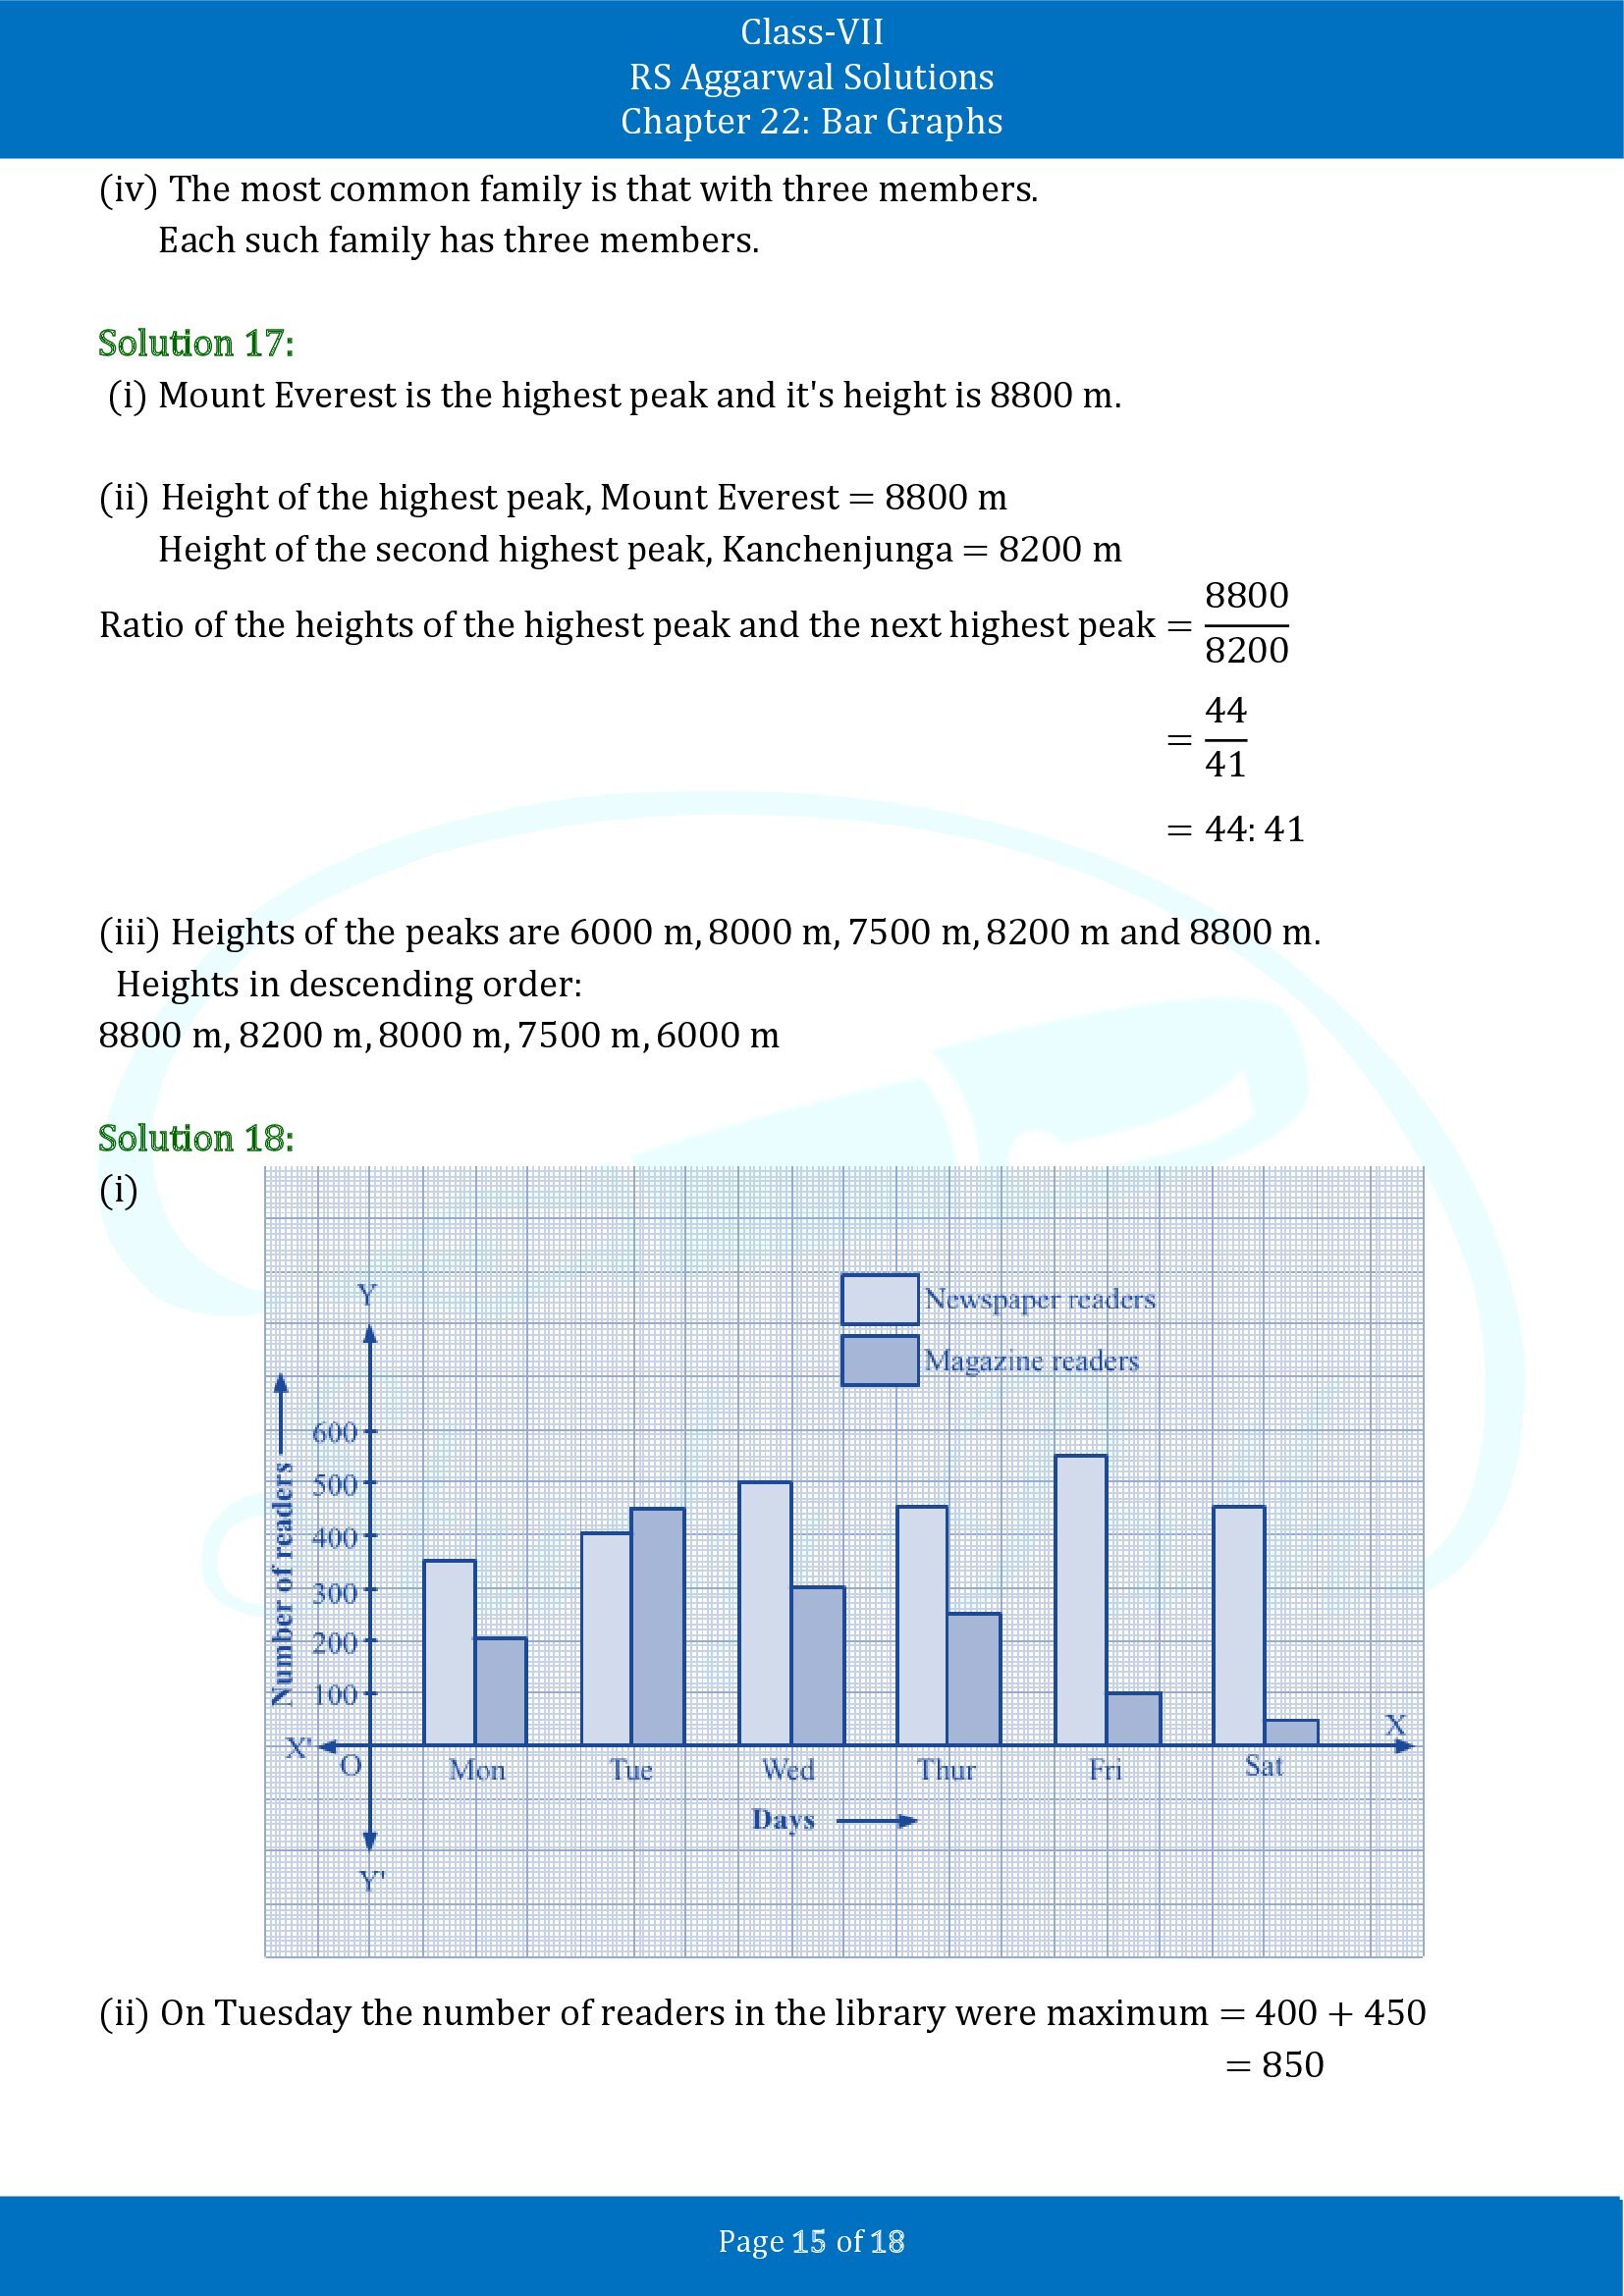 RS Aggarwal Solutions Class 7 Chapter 22 Bar Graphs 00015